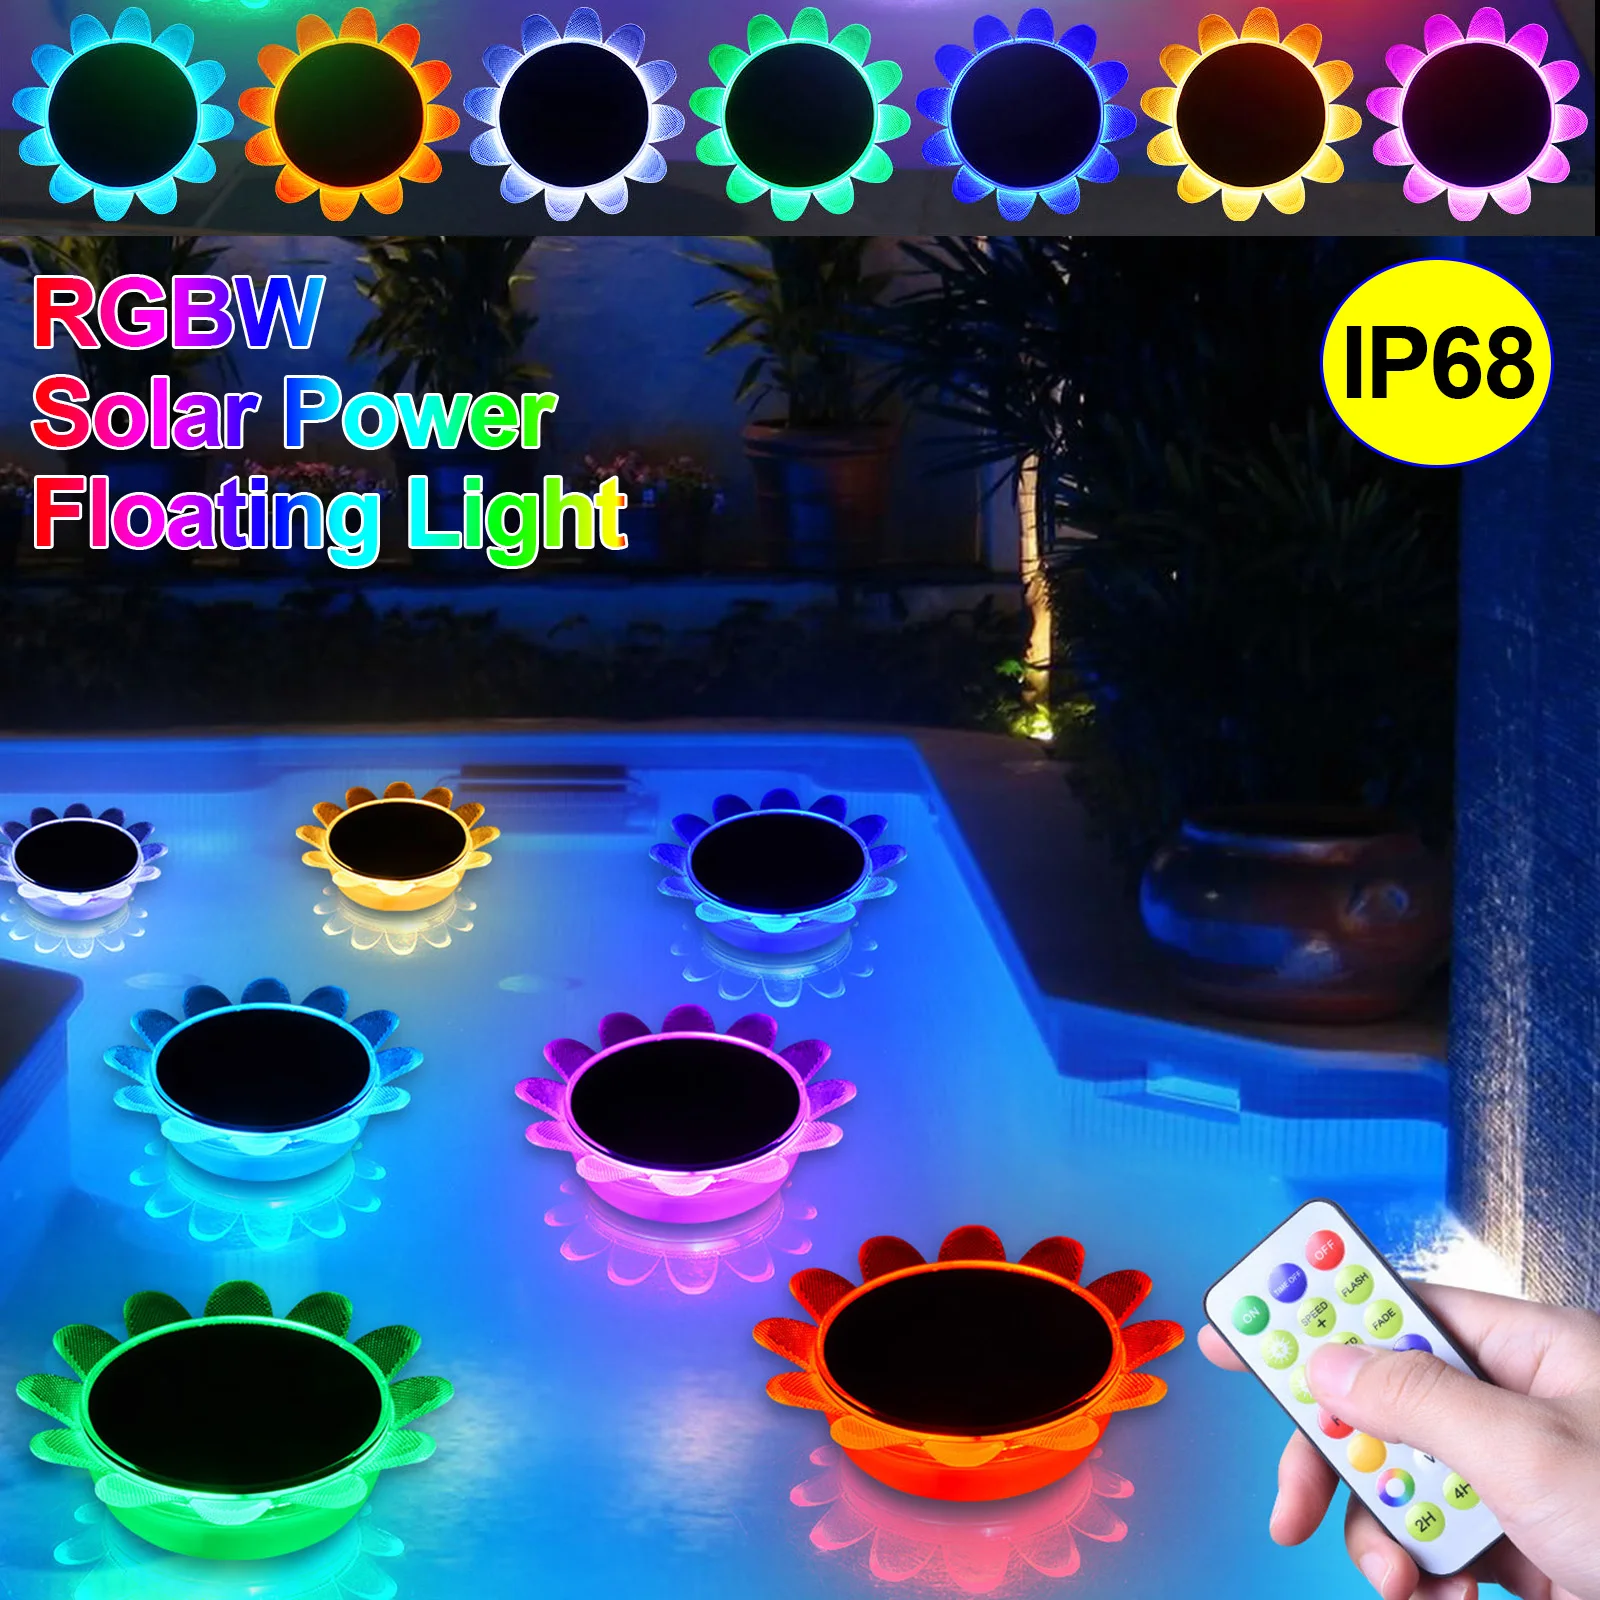 Floating Pool Lights 4 Modes Changing IP68 Waterproof LED Pond Lights IR Remote Control Solar Pool Lights Sunflower Pool Decor kumi gw16t pro smartwatch 1 3 touch screen multiple sport modes heart health spo2 measurement ip68 waterproof gold